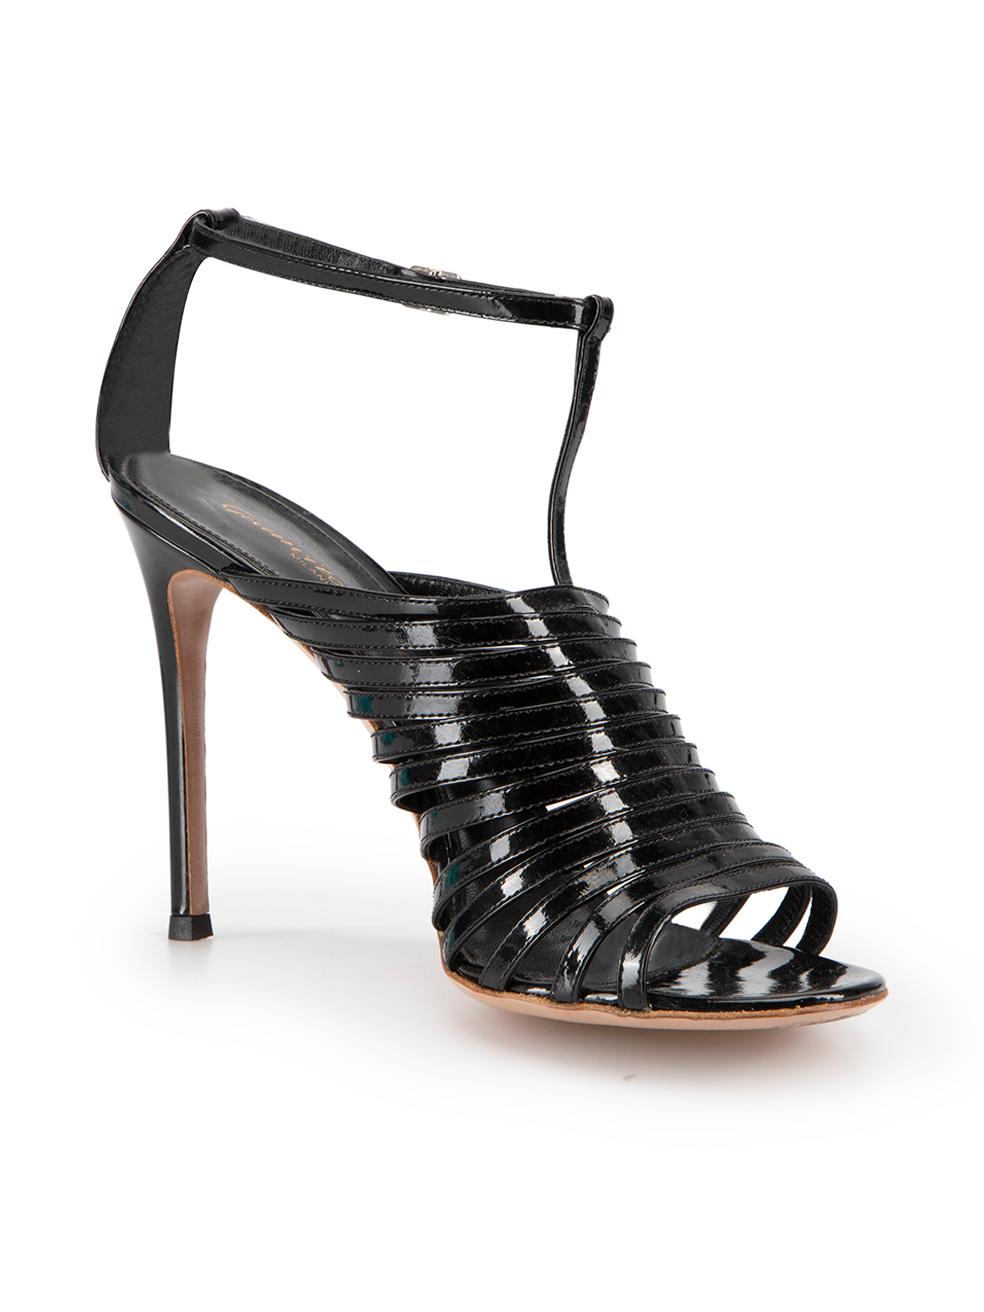 CONDITION is Very good. Minimal wear to sandals is evident. Minimal wear to uppers however mild abrasion to soles seen on this used Gianvito Rossi designer resale item.
  
Details
Black
Patent leather
Heeled sandals
High heel
Strappy
Open